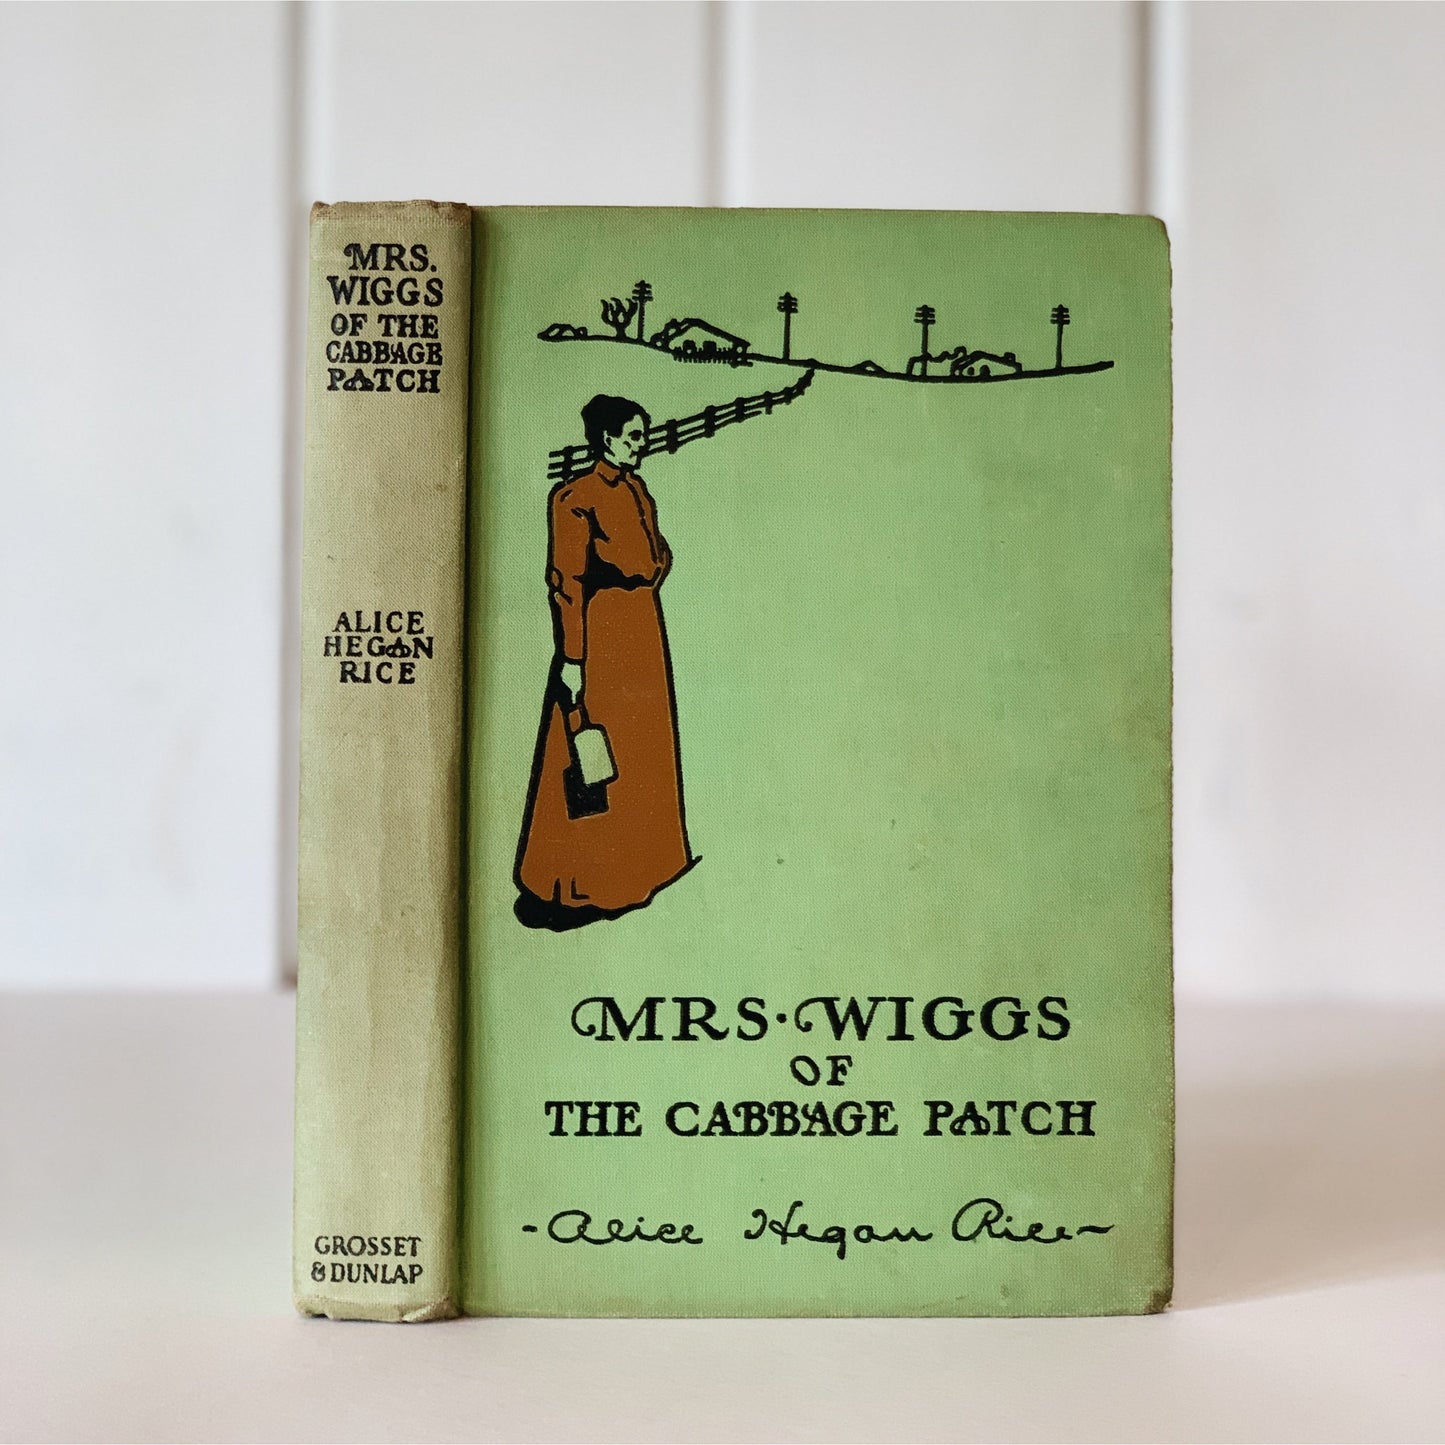 Mrs. Wiggs of the Cabbage Patch, 1928, Domestic Fiction Hardcover, Alice Hogan Rice